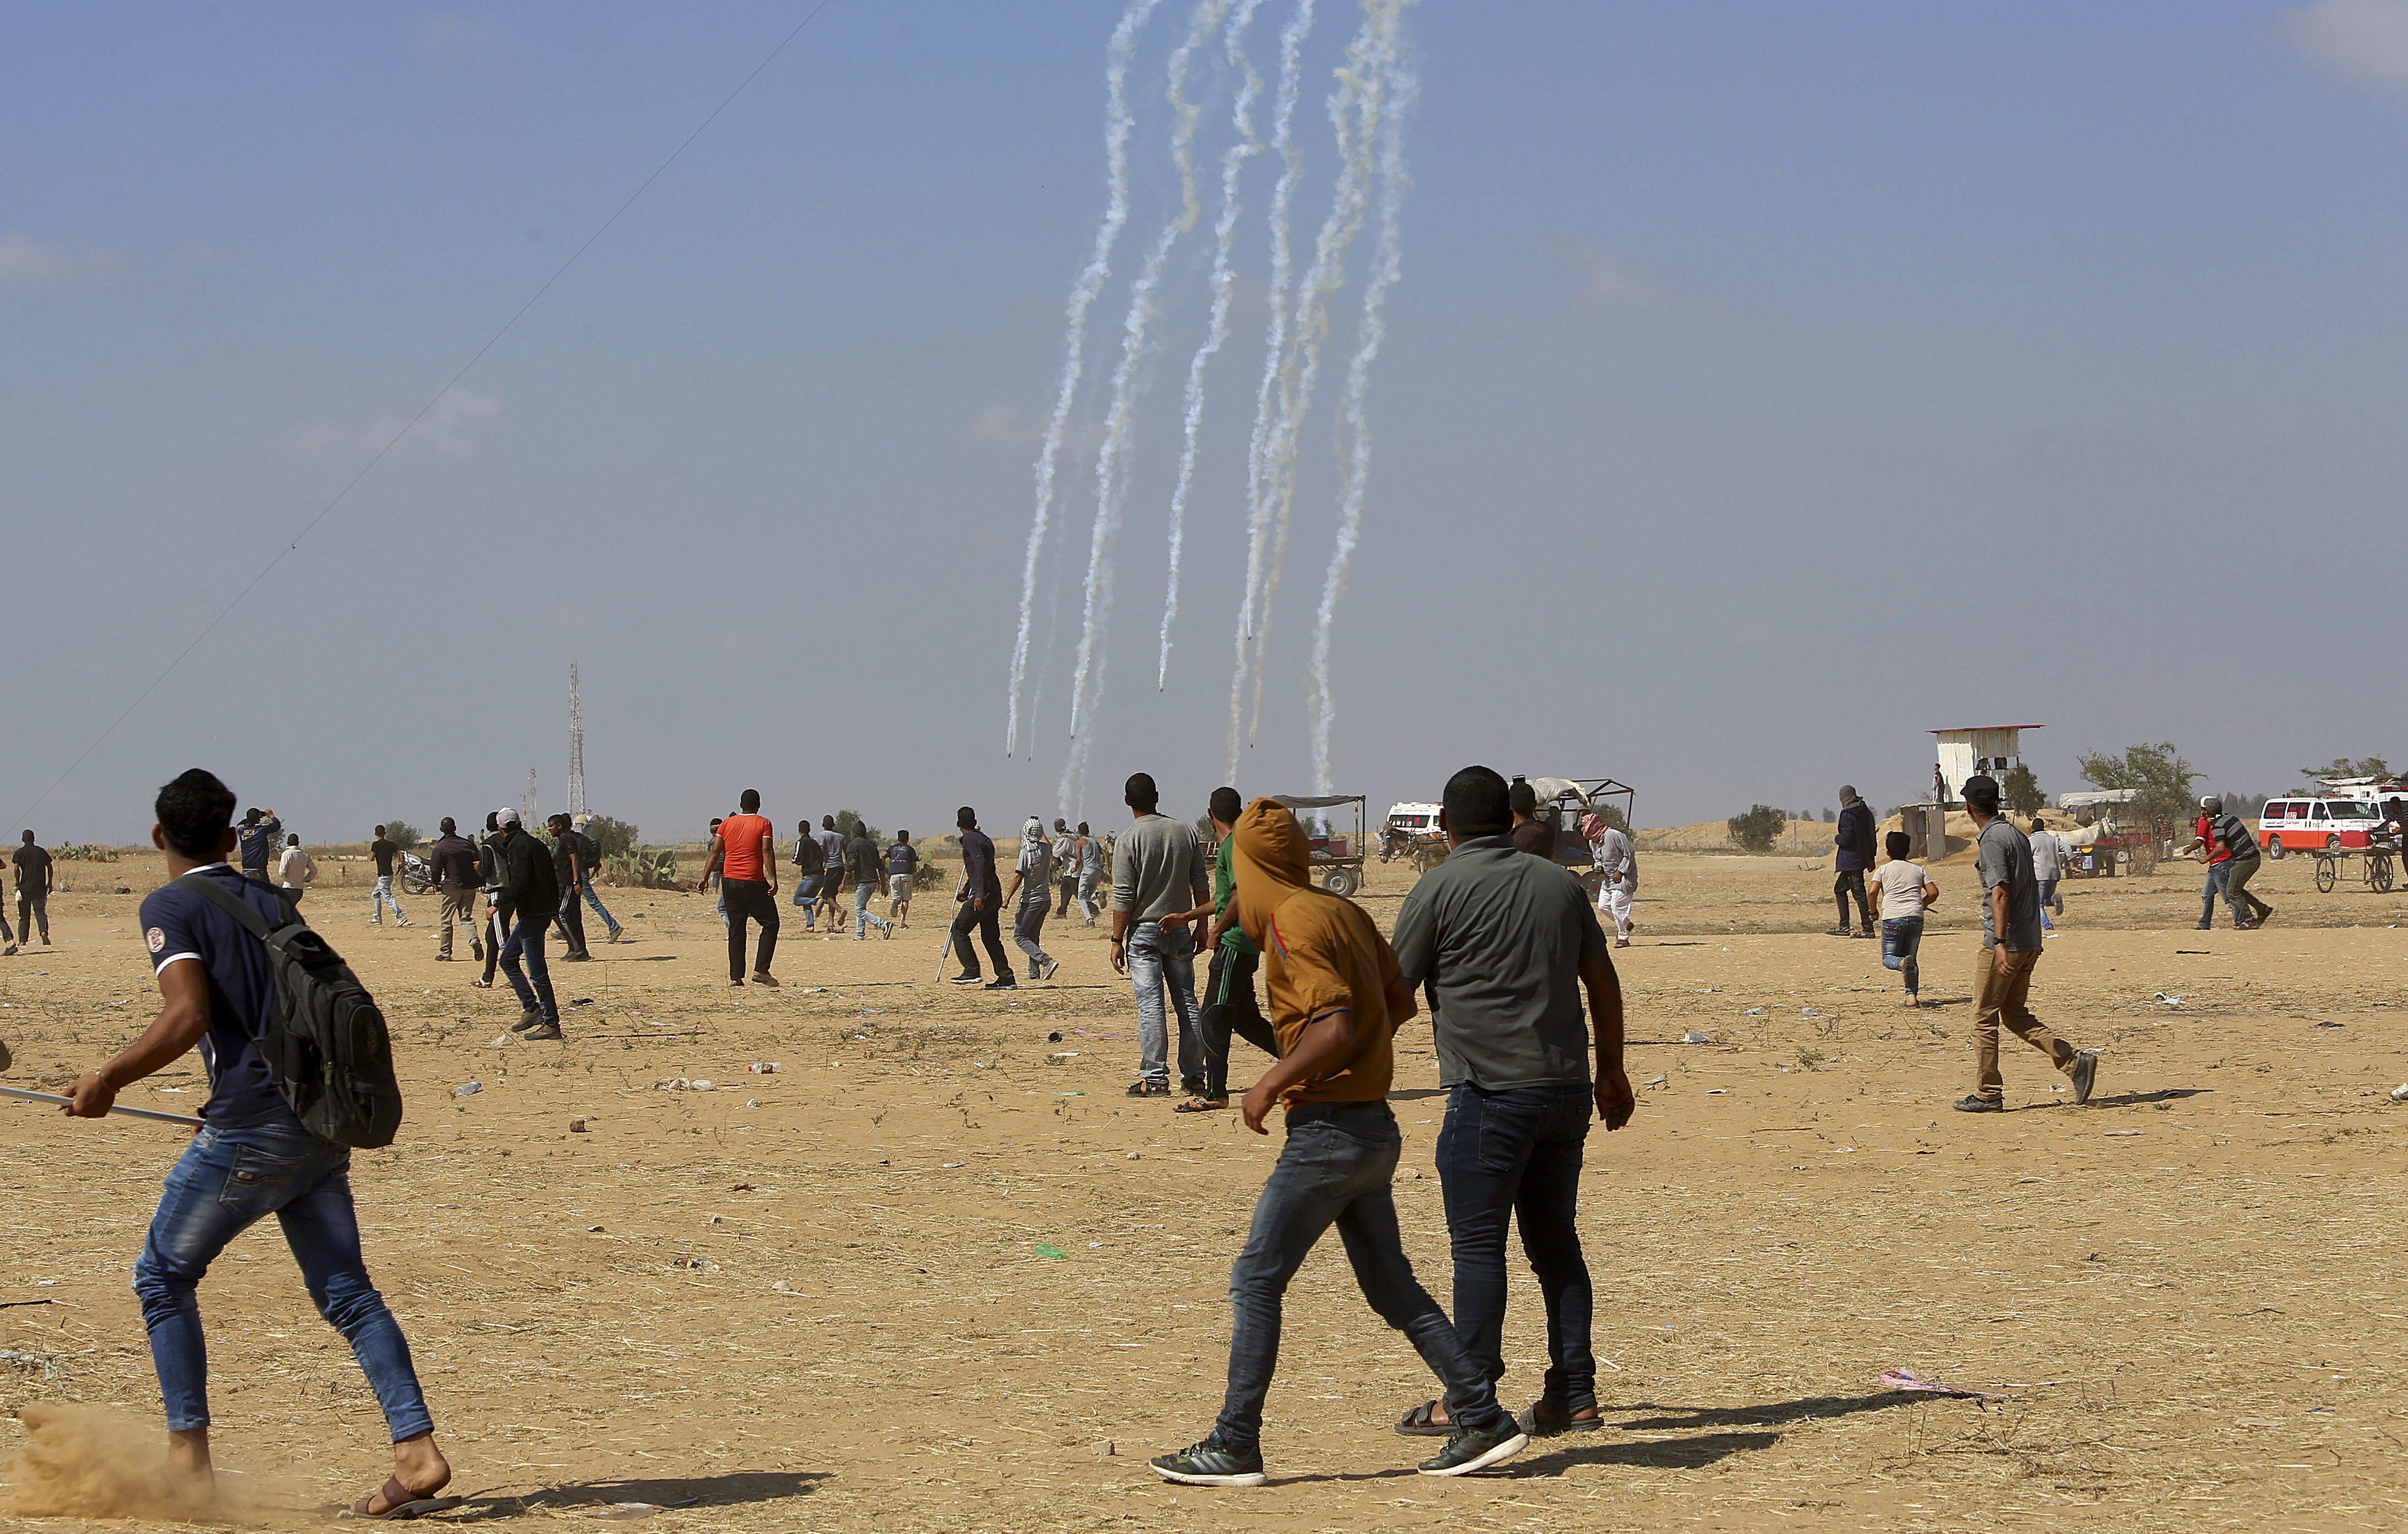 An Israeli drone fires teargas canisters on Palestinian protesters, east of Khan Younis, in the Gaza Strip, Tuesday, May 15, 2018. Israel faced a growing backlash Tuesday and new charges of using excessive force, a day after Israeli troops firing from across a border fence killed 59 Palestinians and wounded more than 2,700 at a mass protest in Gaza. (AP Photo/Adel Hana)